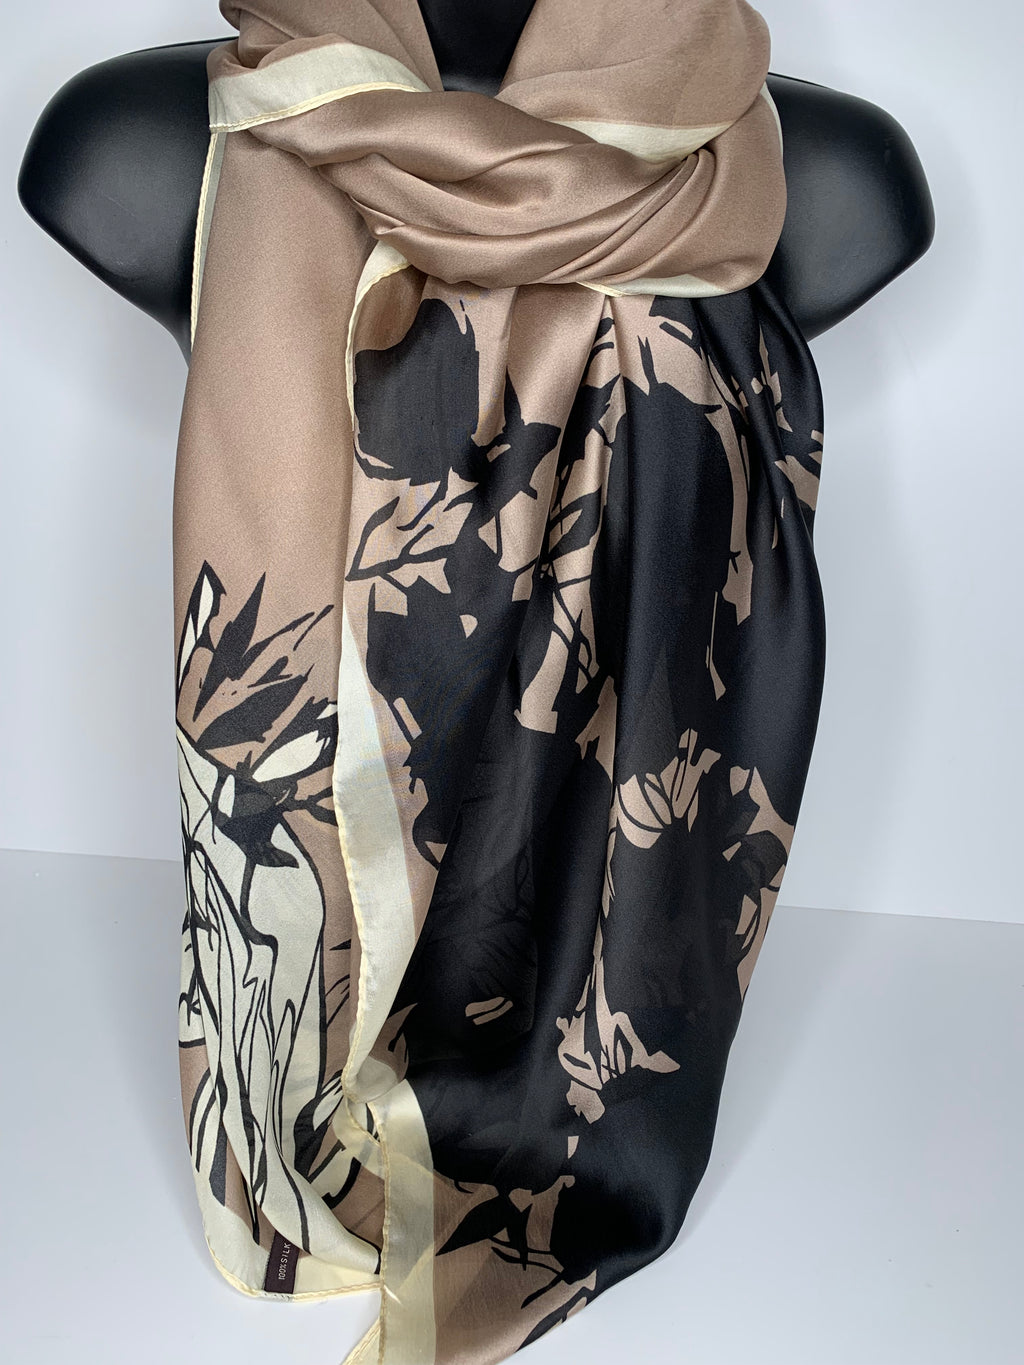 Lighter weight 100% silk luxurious rose print scarf in shades of black, cream and champagne